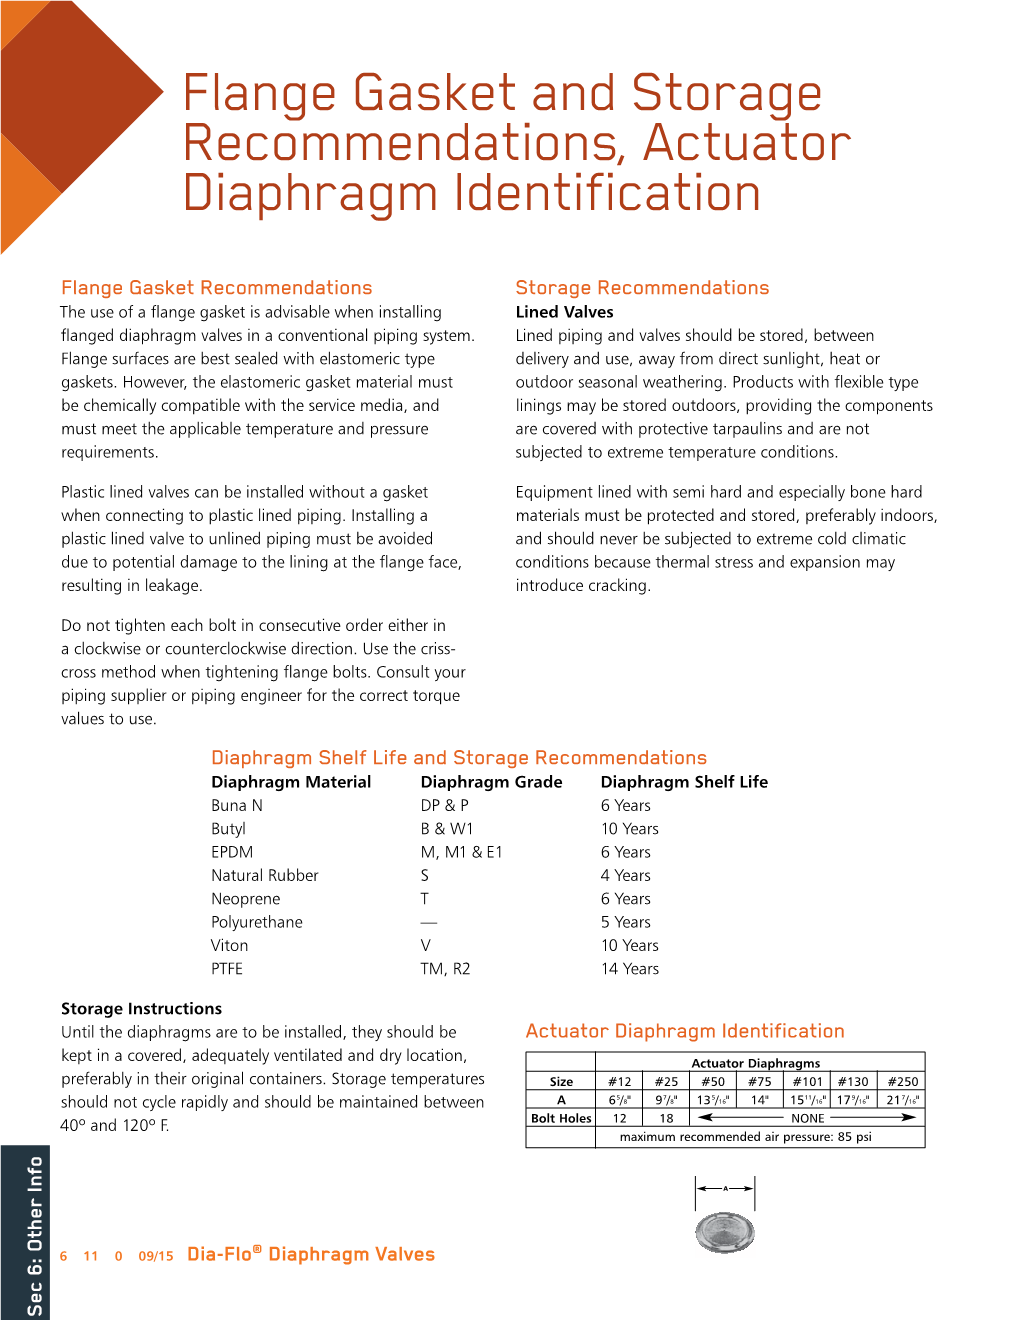 Flange Gasket and Storage Recommendations, Actuator Diaphragm Identification